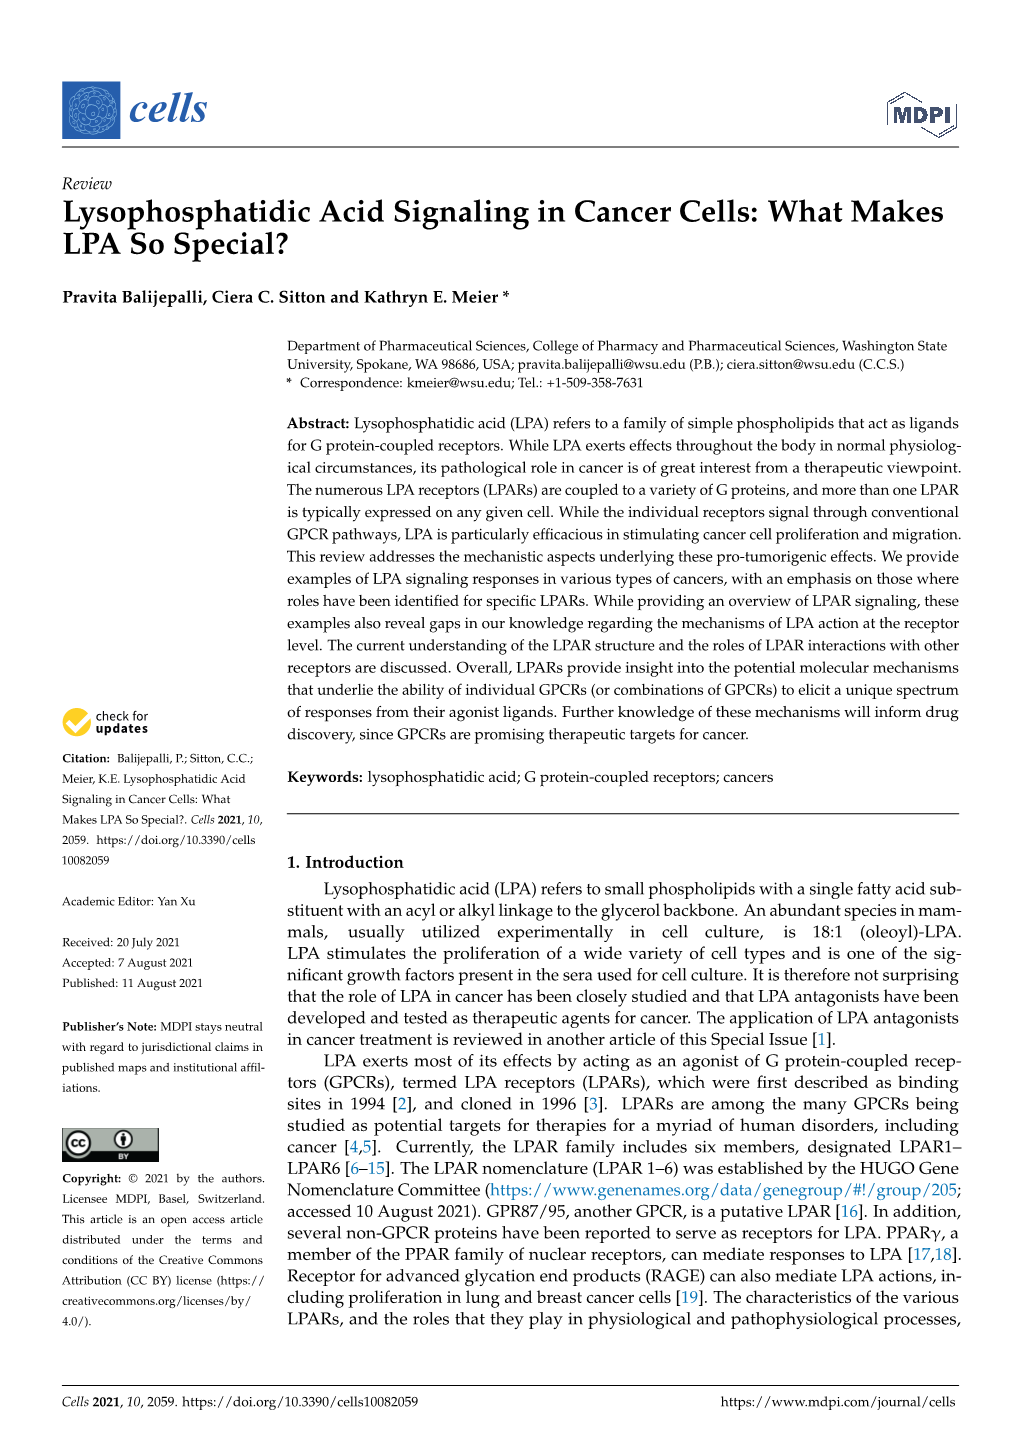 Lysophosphatidic Acid Signaling in Cancer Cells: What Makes LPA So Special?